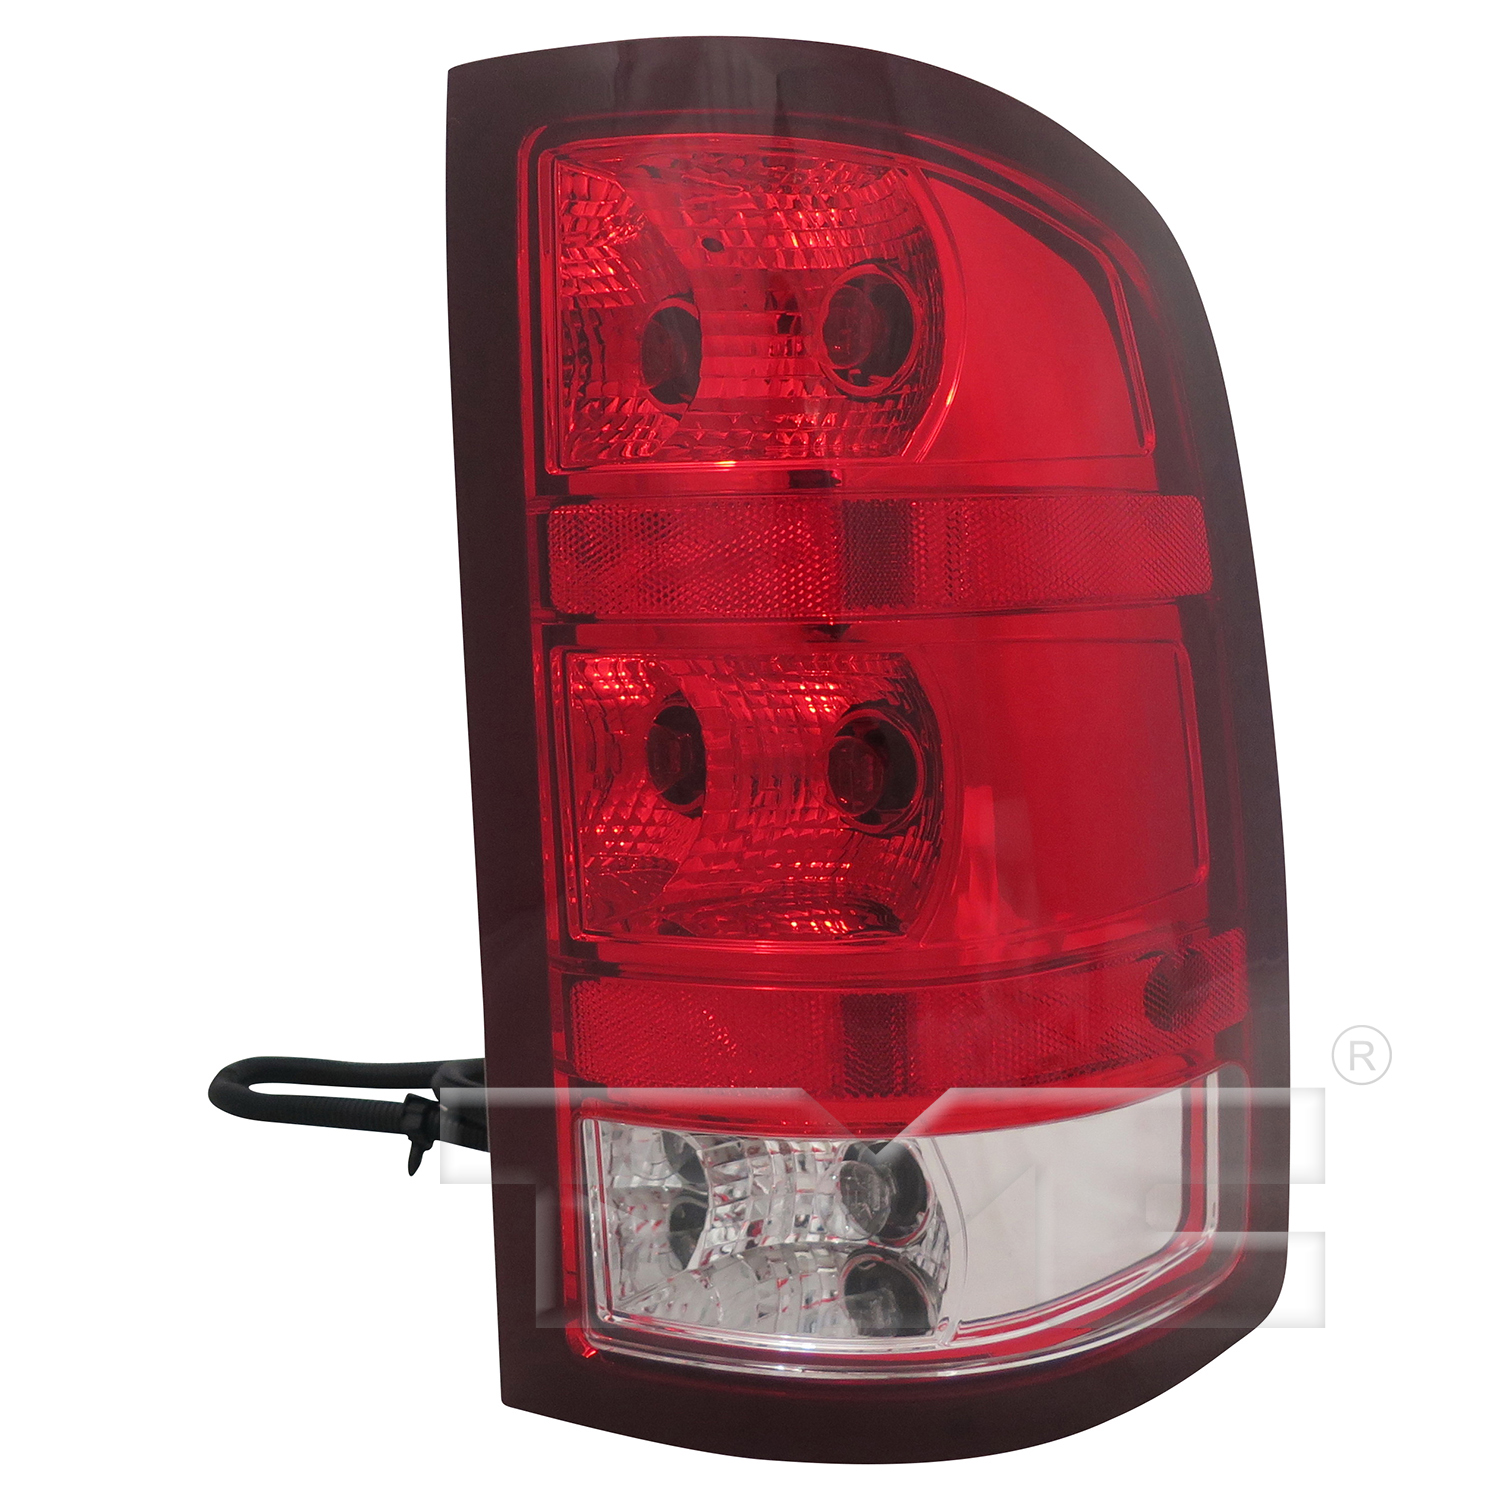 Aftermarket TAILLIGHTS for GMC - SIERRA 2500 HD, SIERRA 2500 HD,07-10,RT Taillamp assy